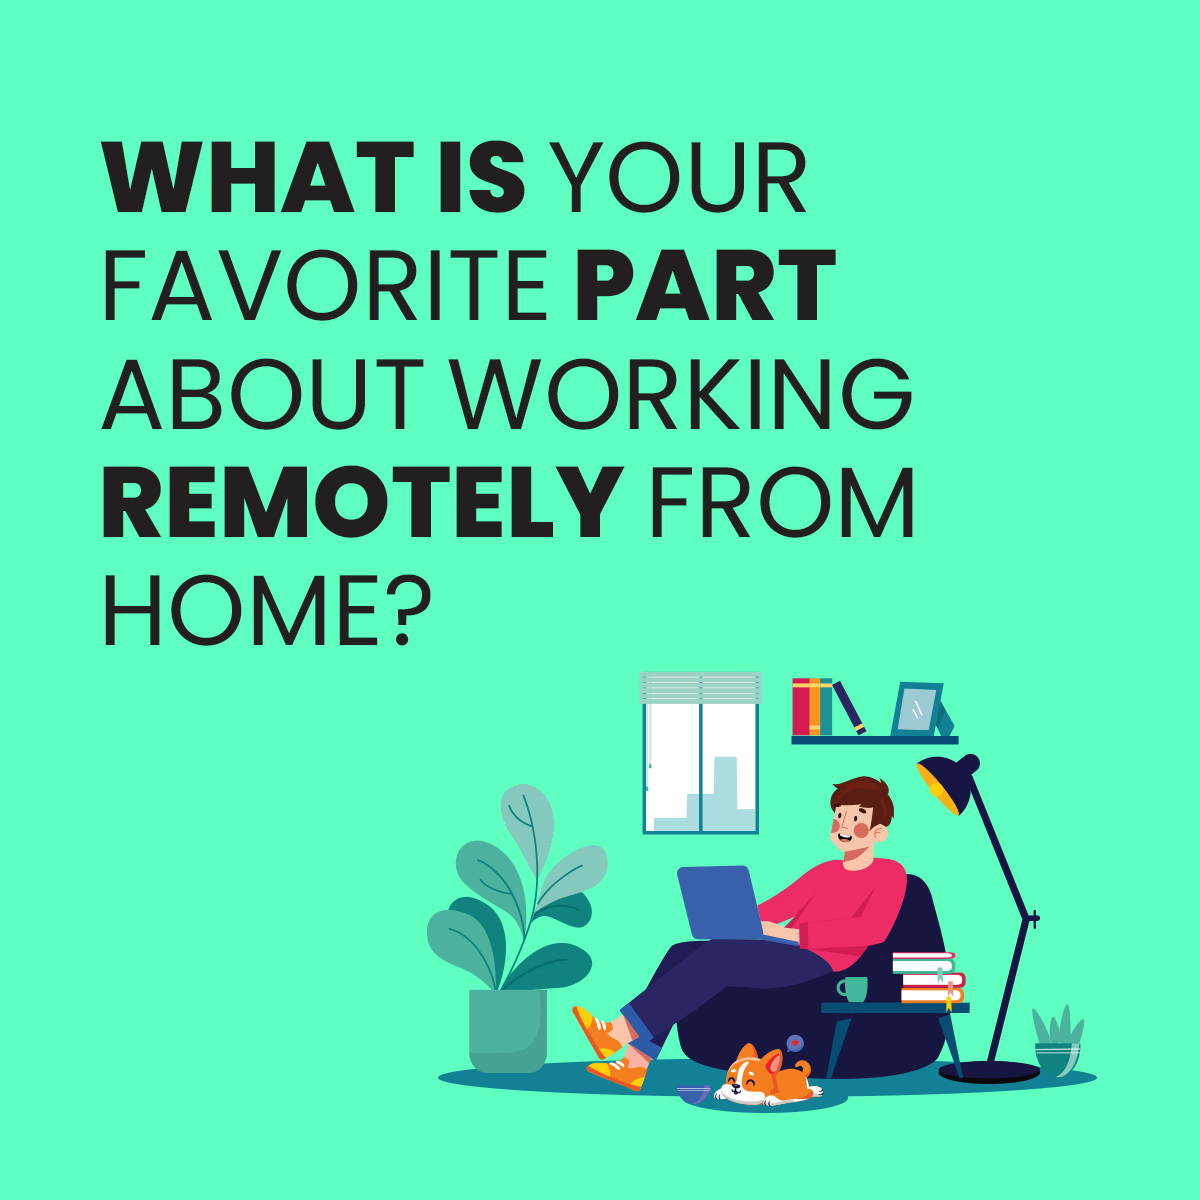 What is your favorite part about working remotely from home? Let me know in the comments.

#favoritething #love #travel #photography #beautiful